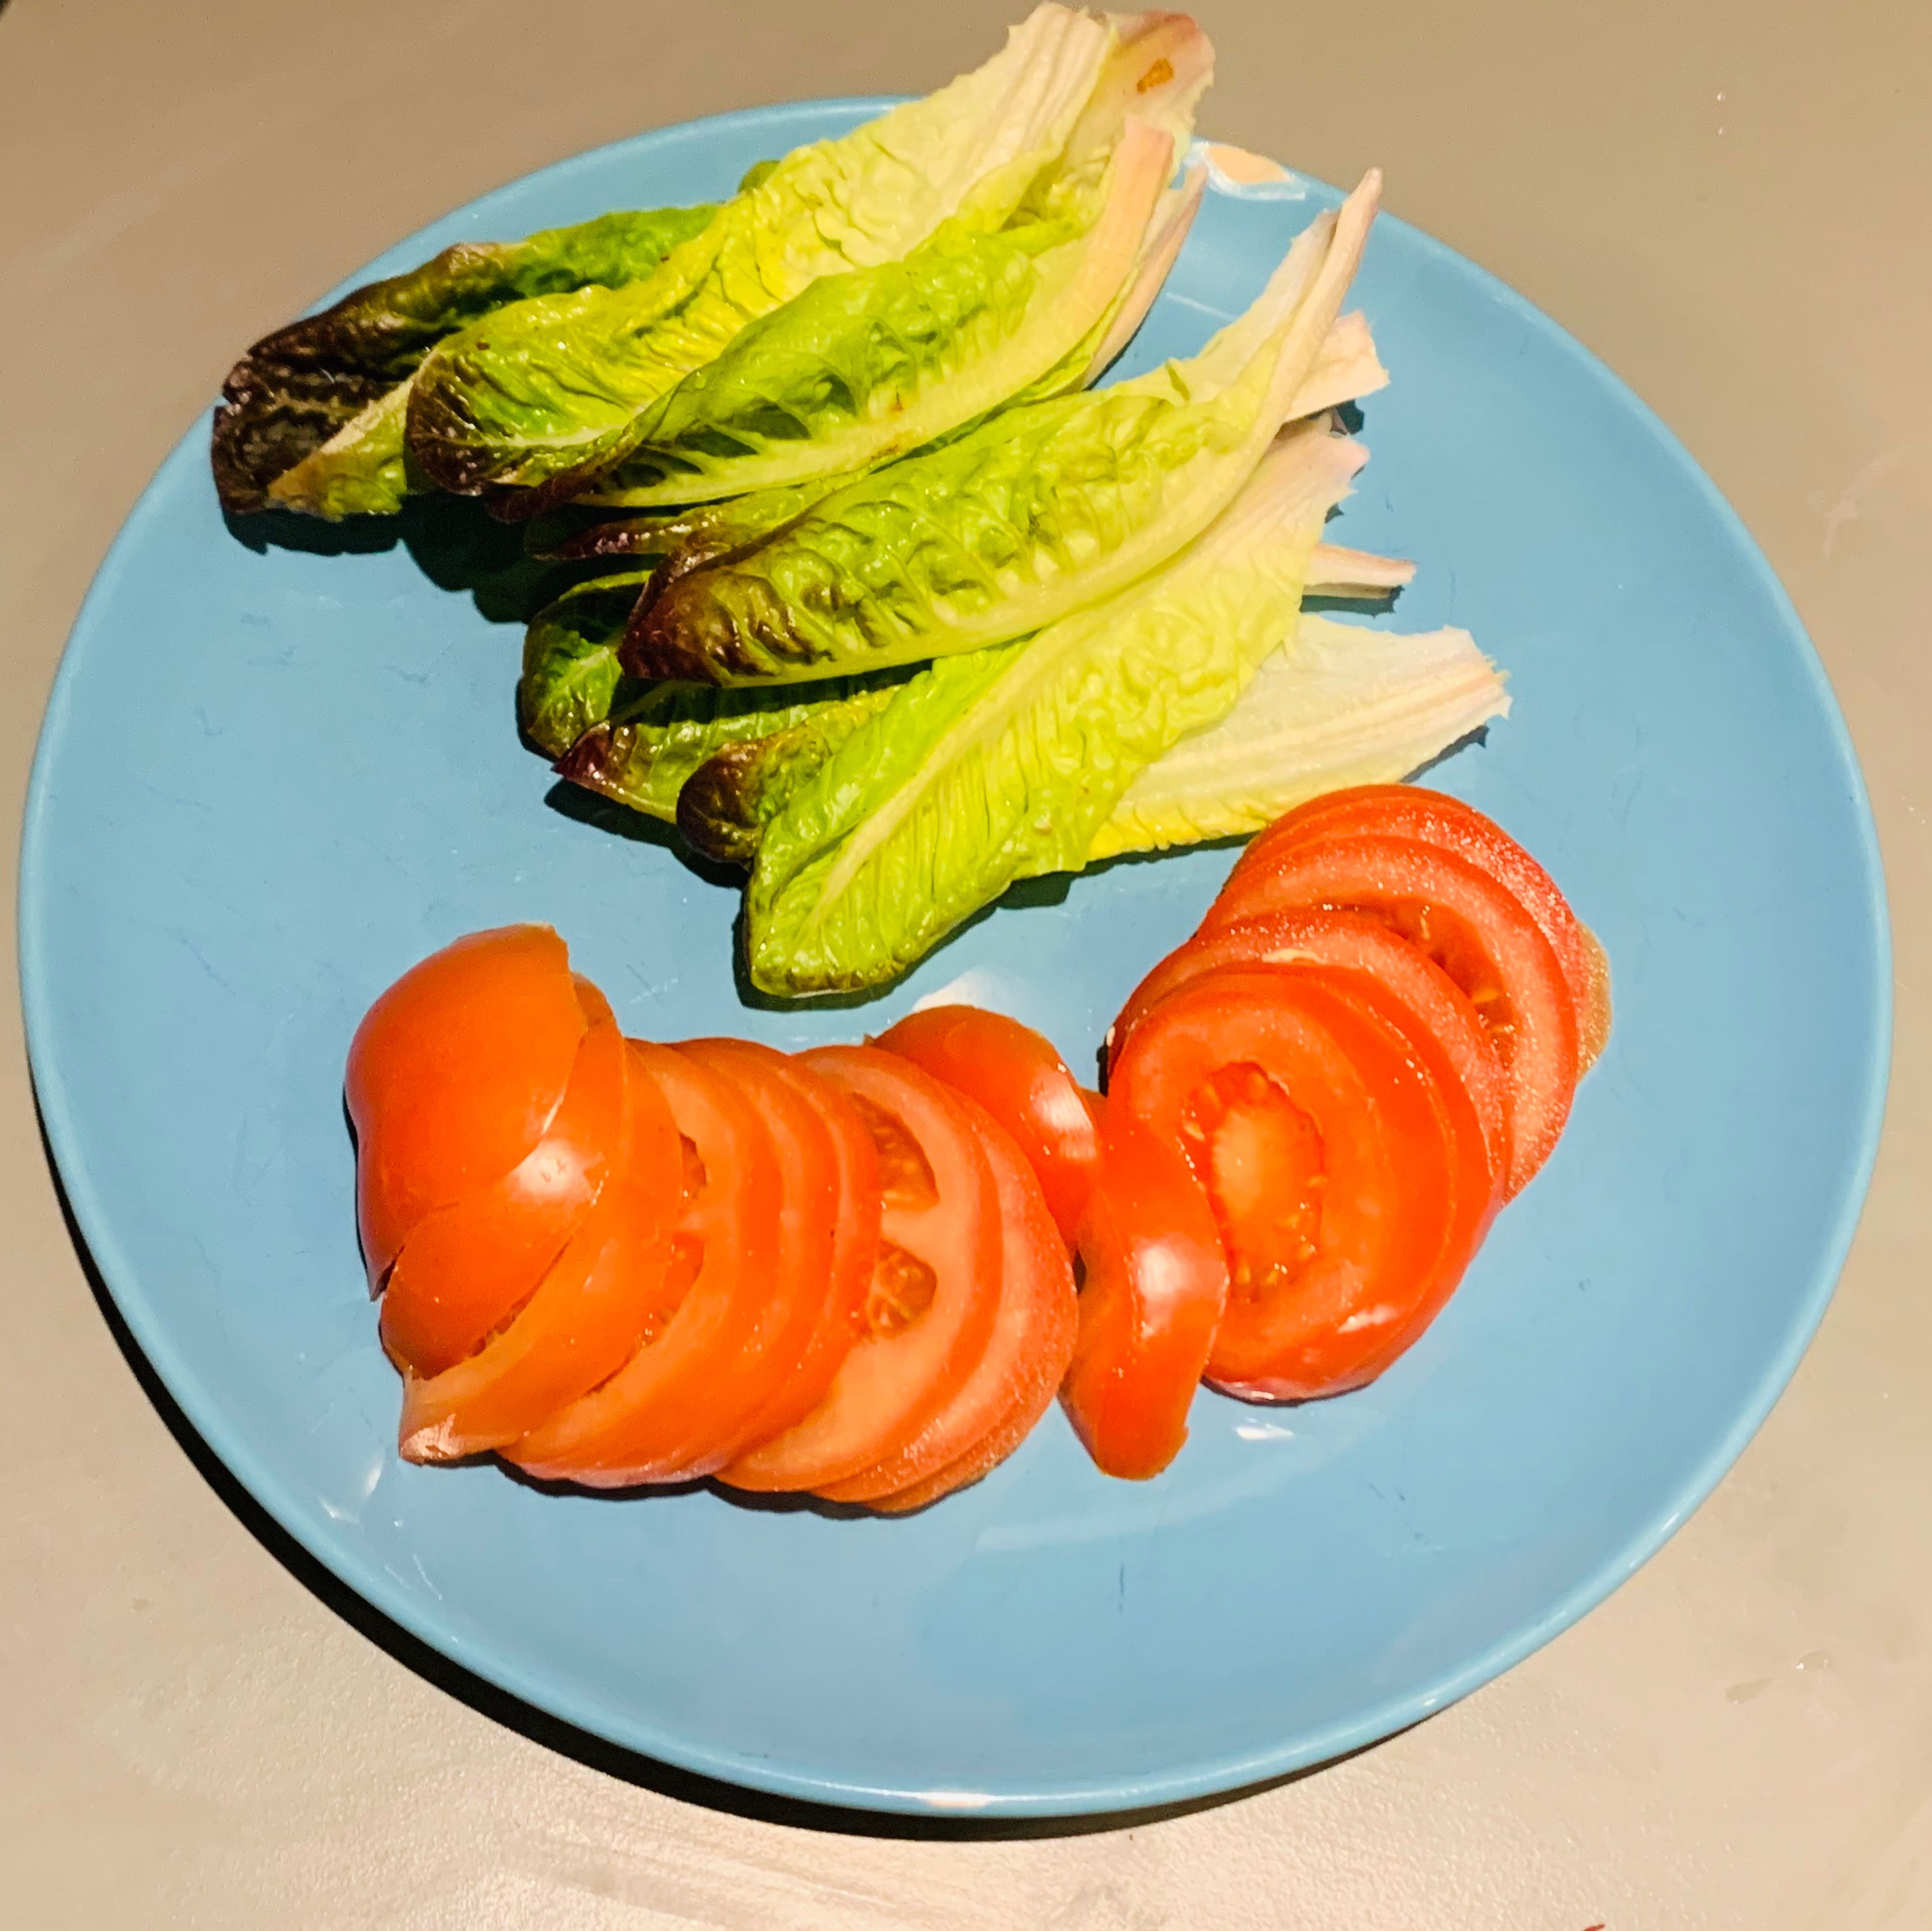 Start easy and warm up by preparing the cabbage and tomatoes